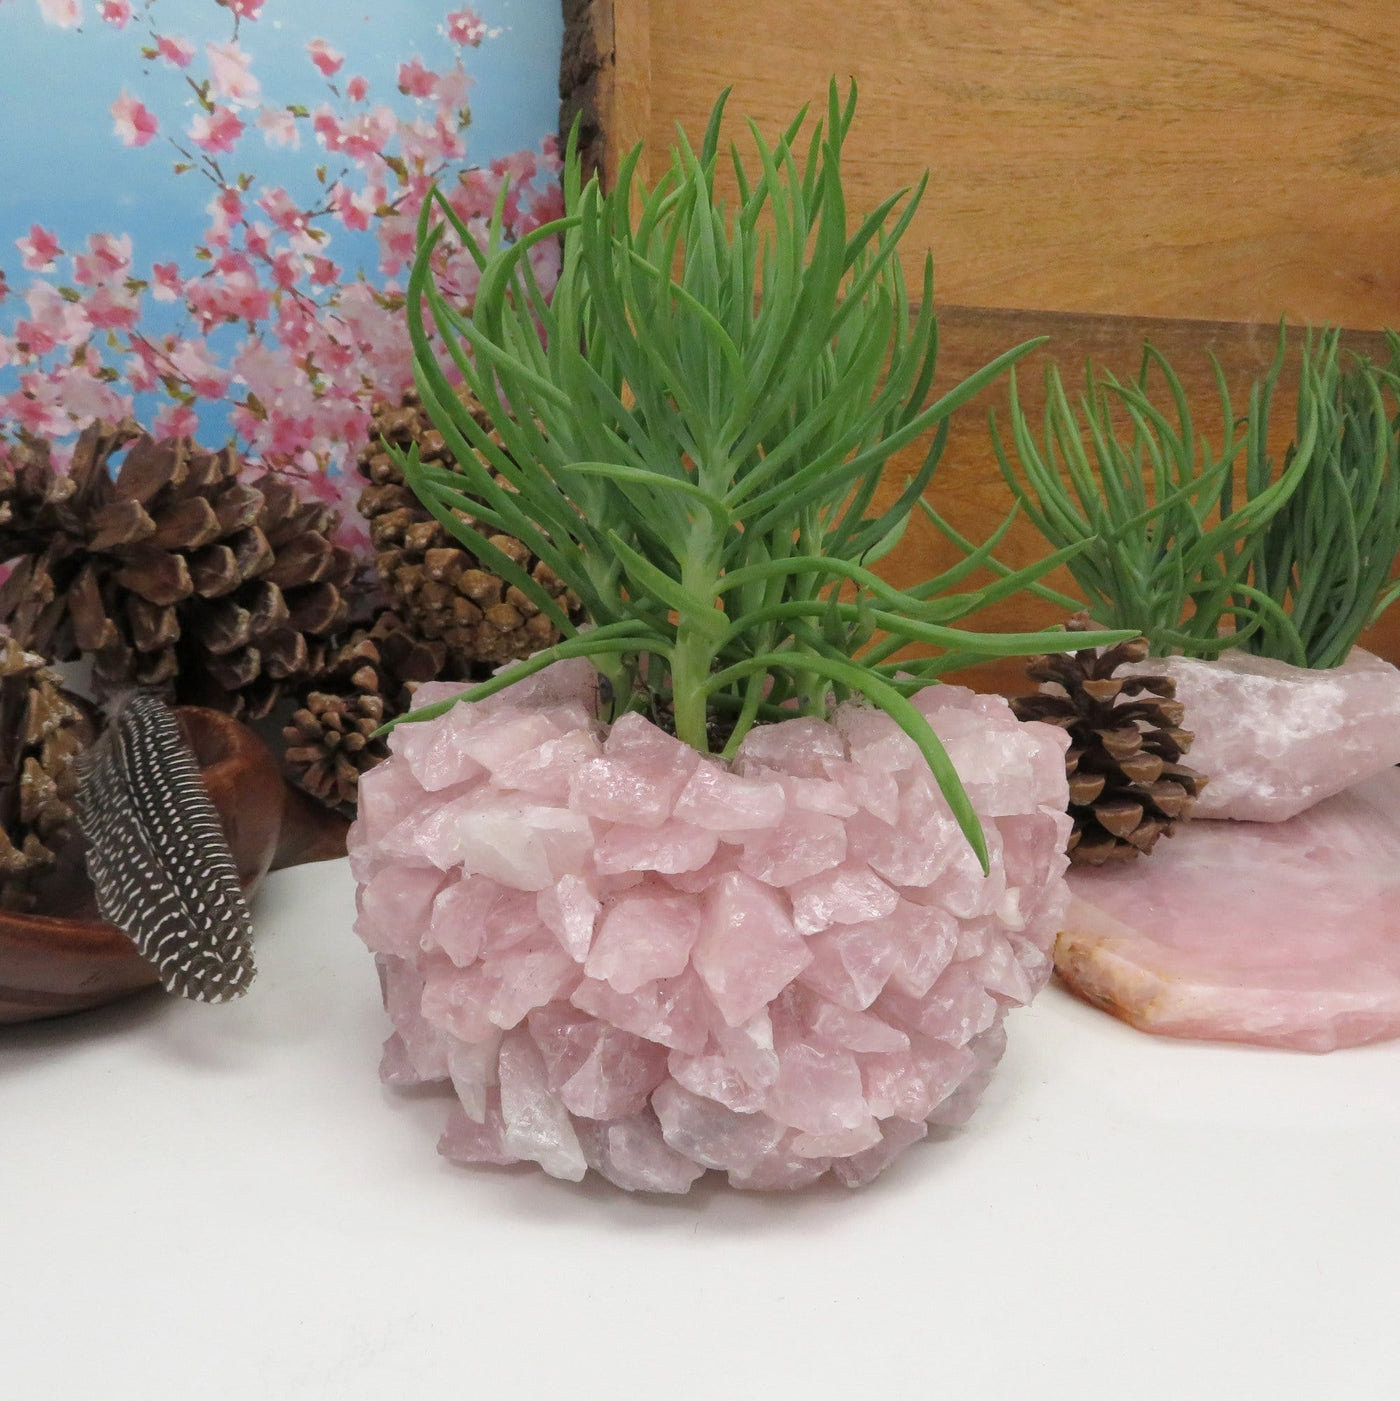 Rose Quartz Planter Pot with succulent in it with various decorations in the background